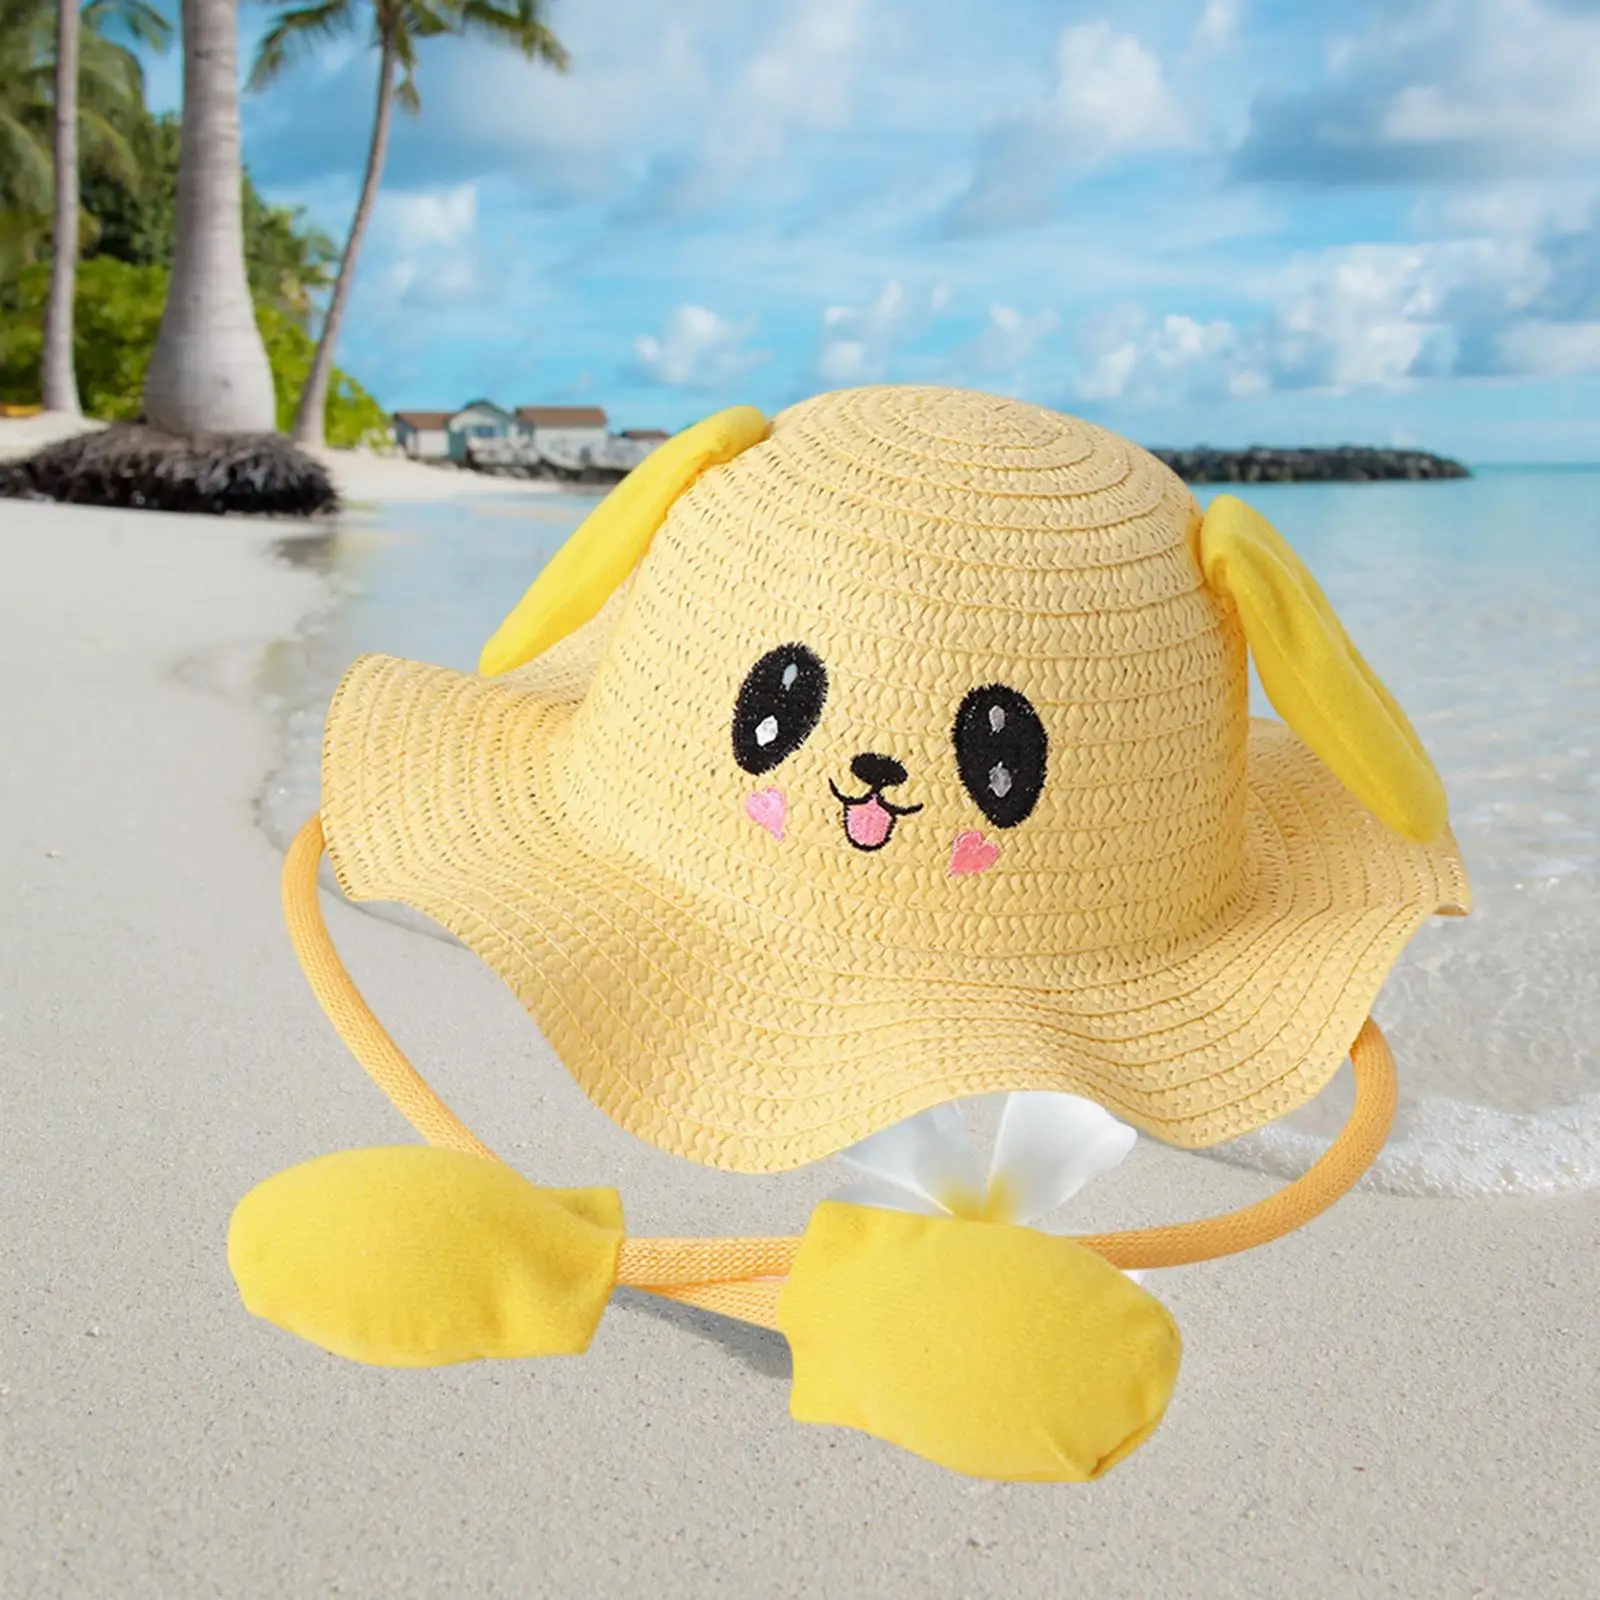 Bunny Straw Hat Cap Fisherman Cap Cute Photo Props Hat Breathable Sun Hat Beach Hat for Holidays Outdoor Vocations Trips Summer